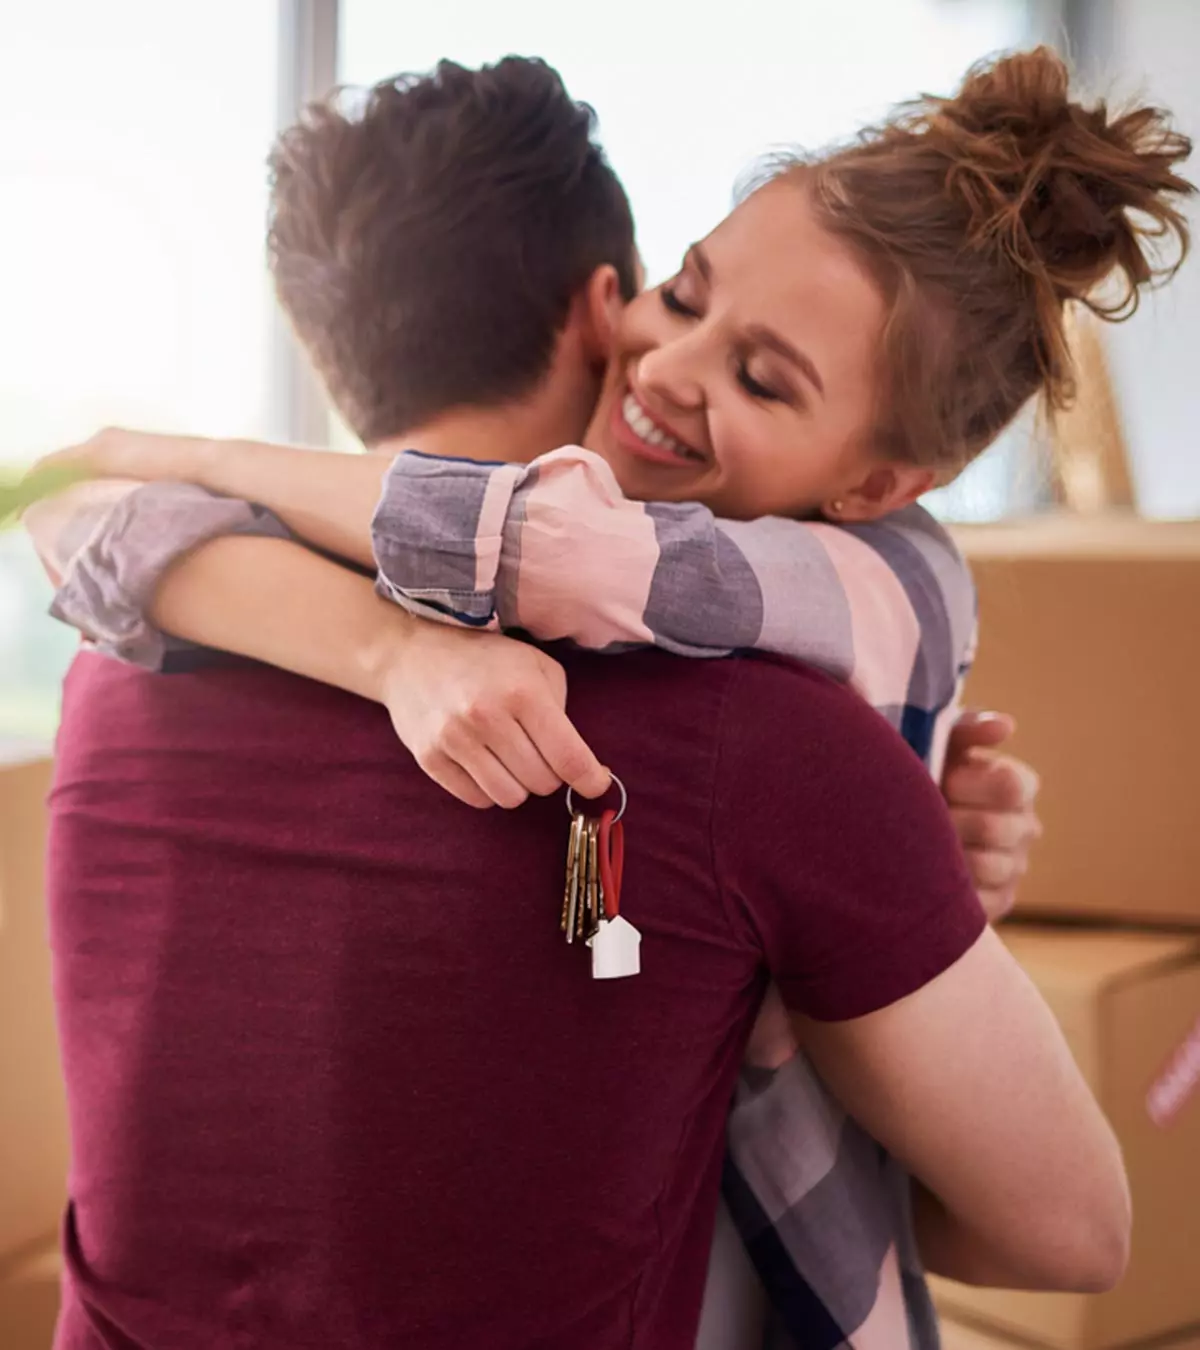 15 Clear Signs You're Ready To Move In Together